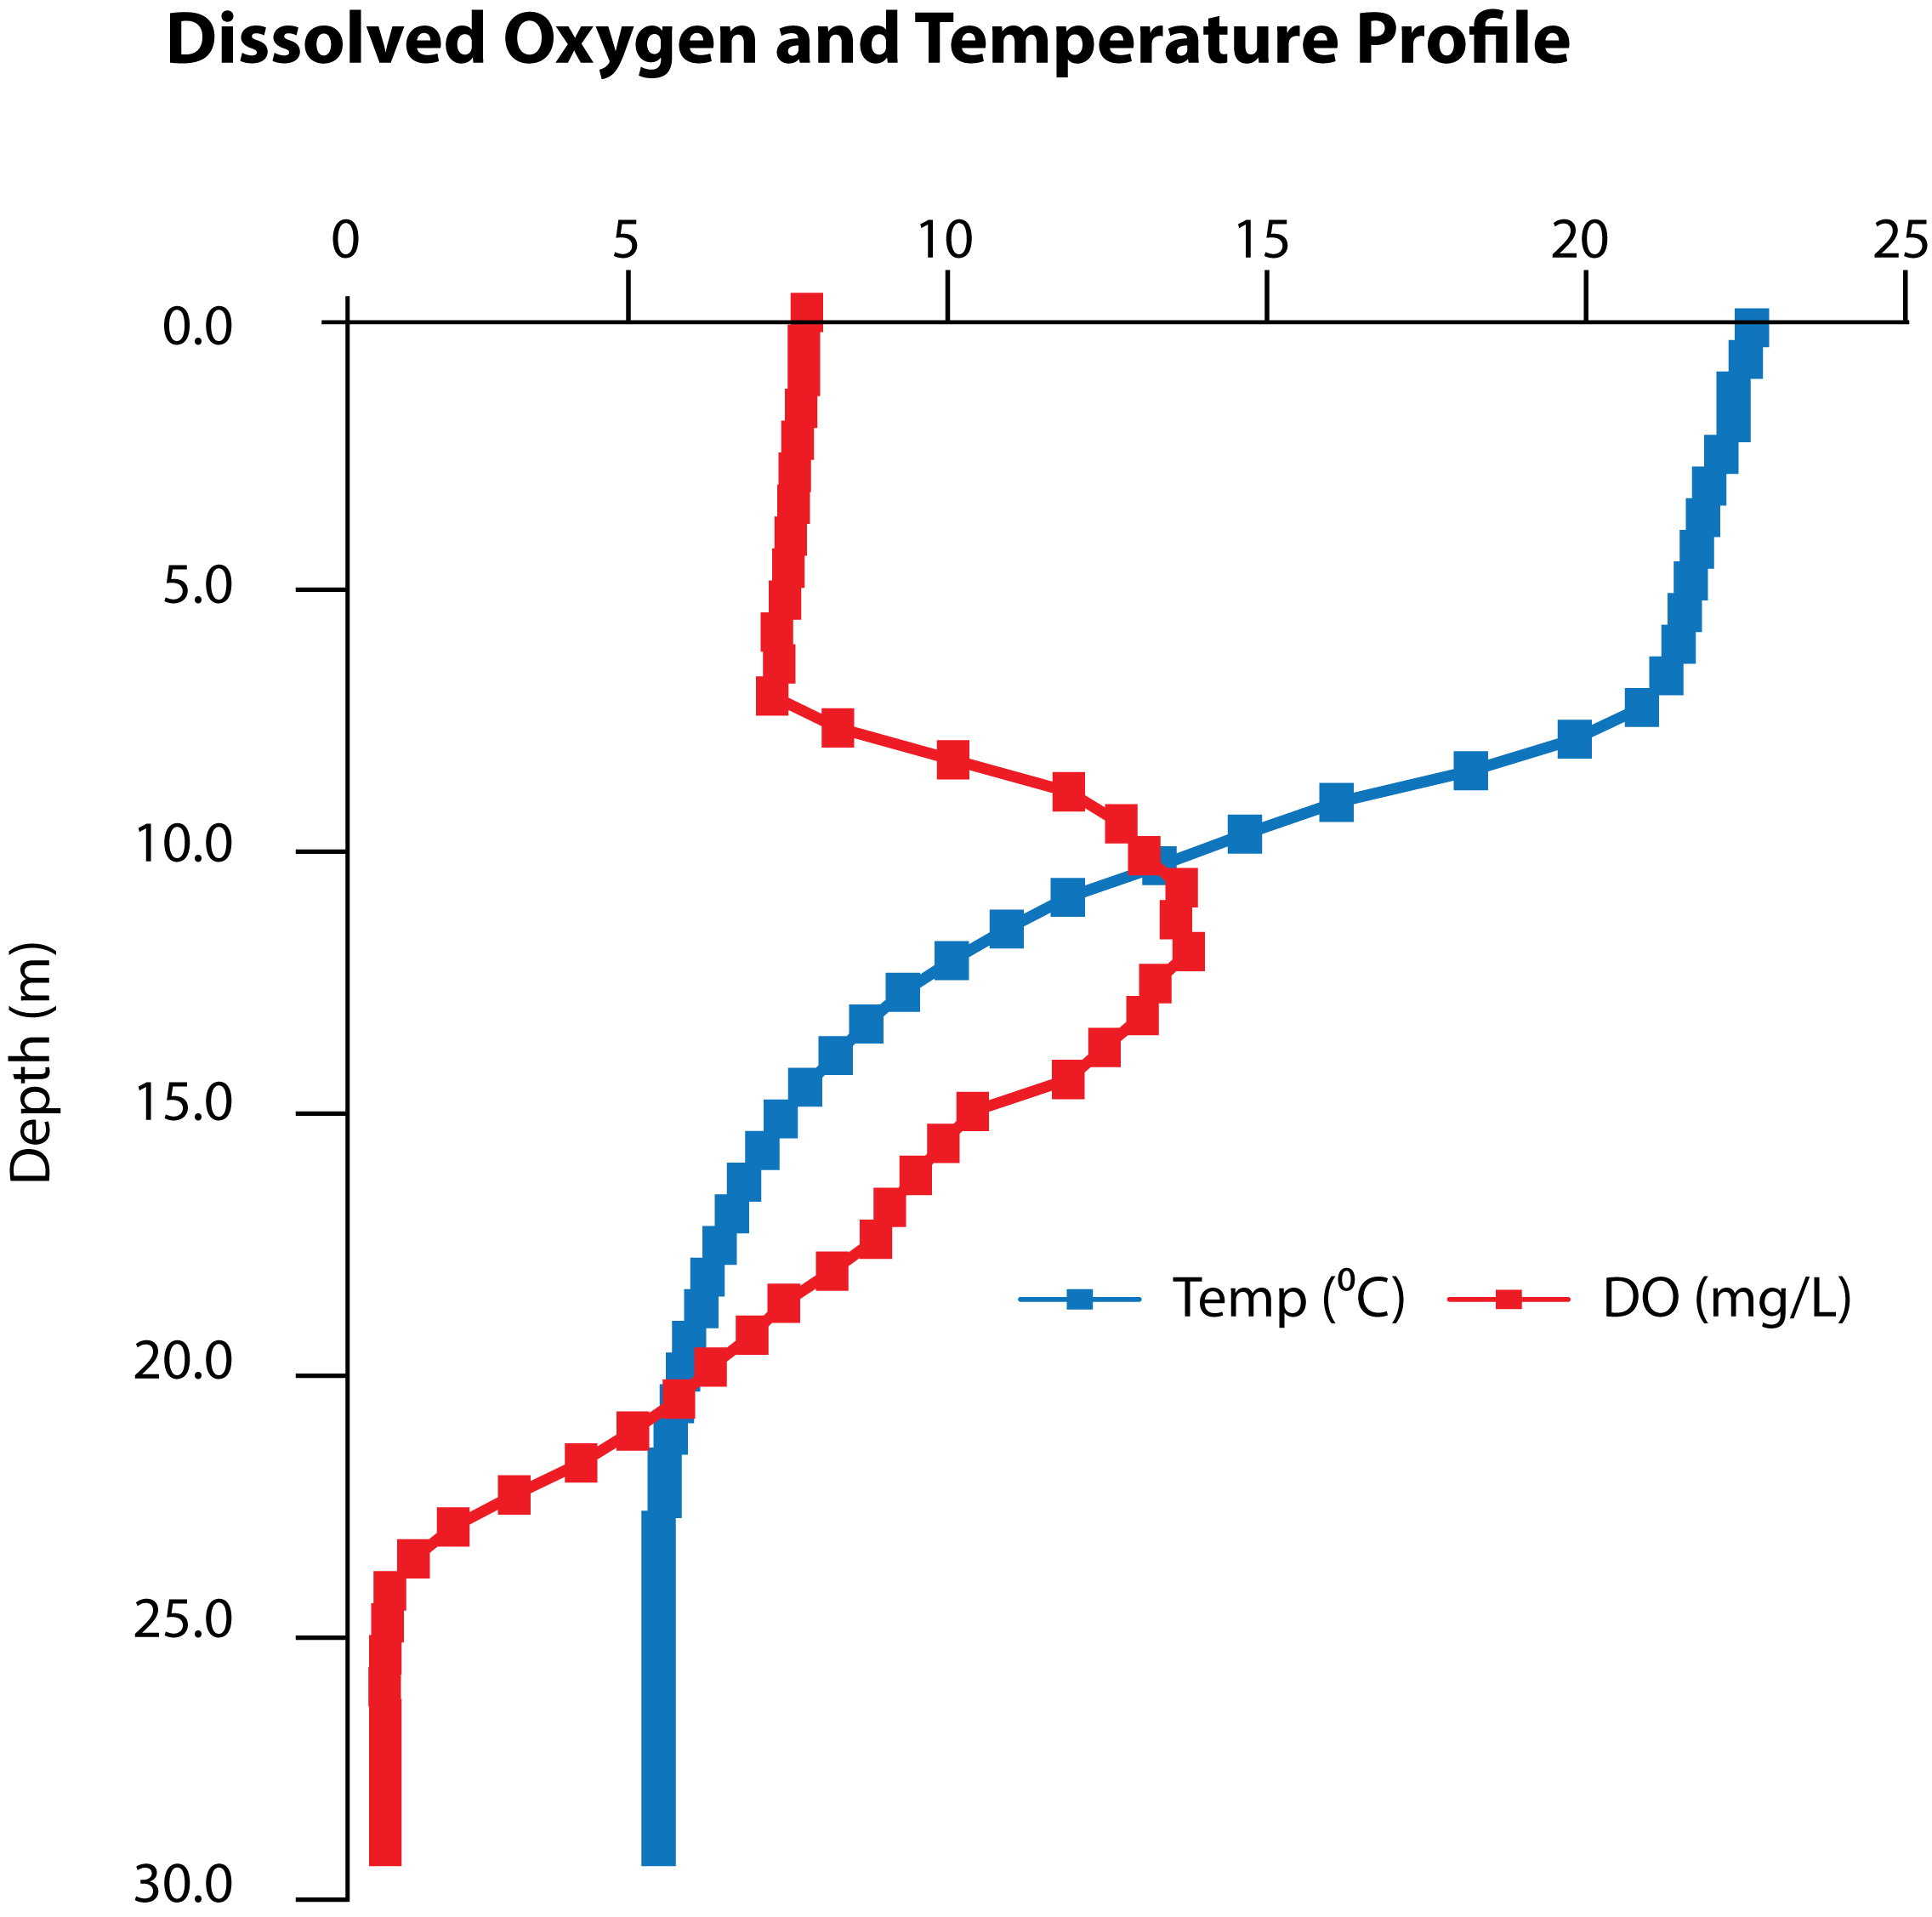 Dissolved oxygen and temperature profile